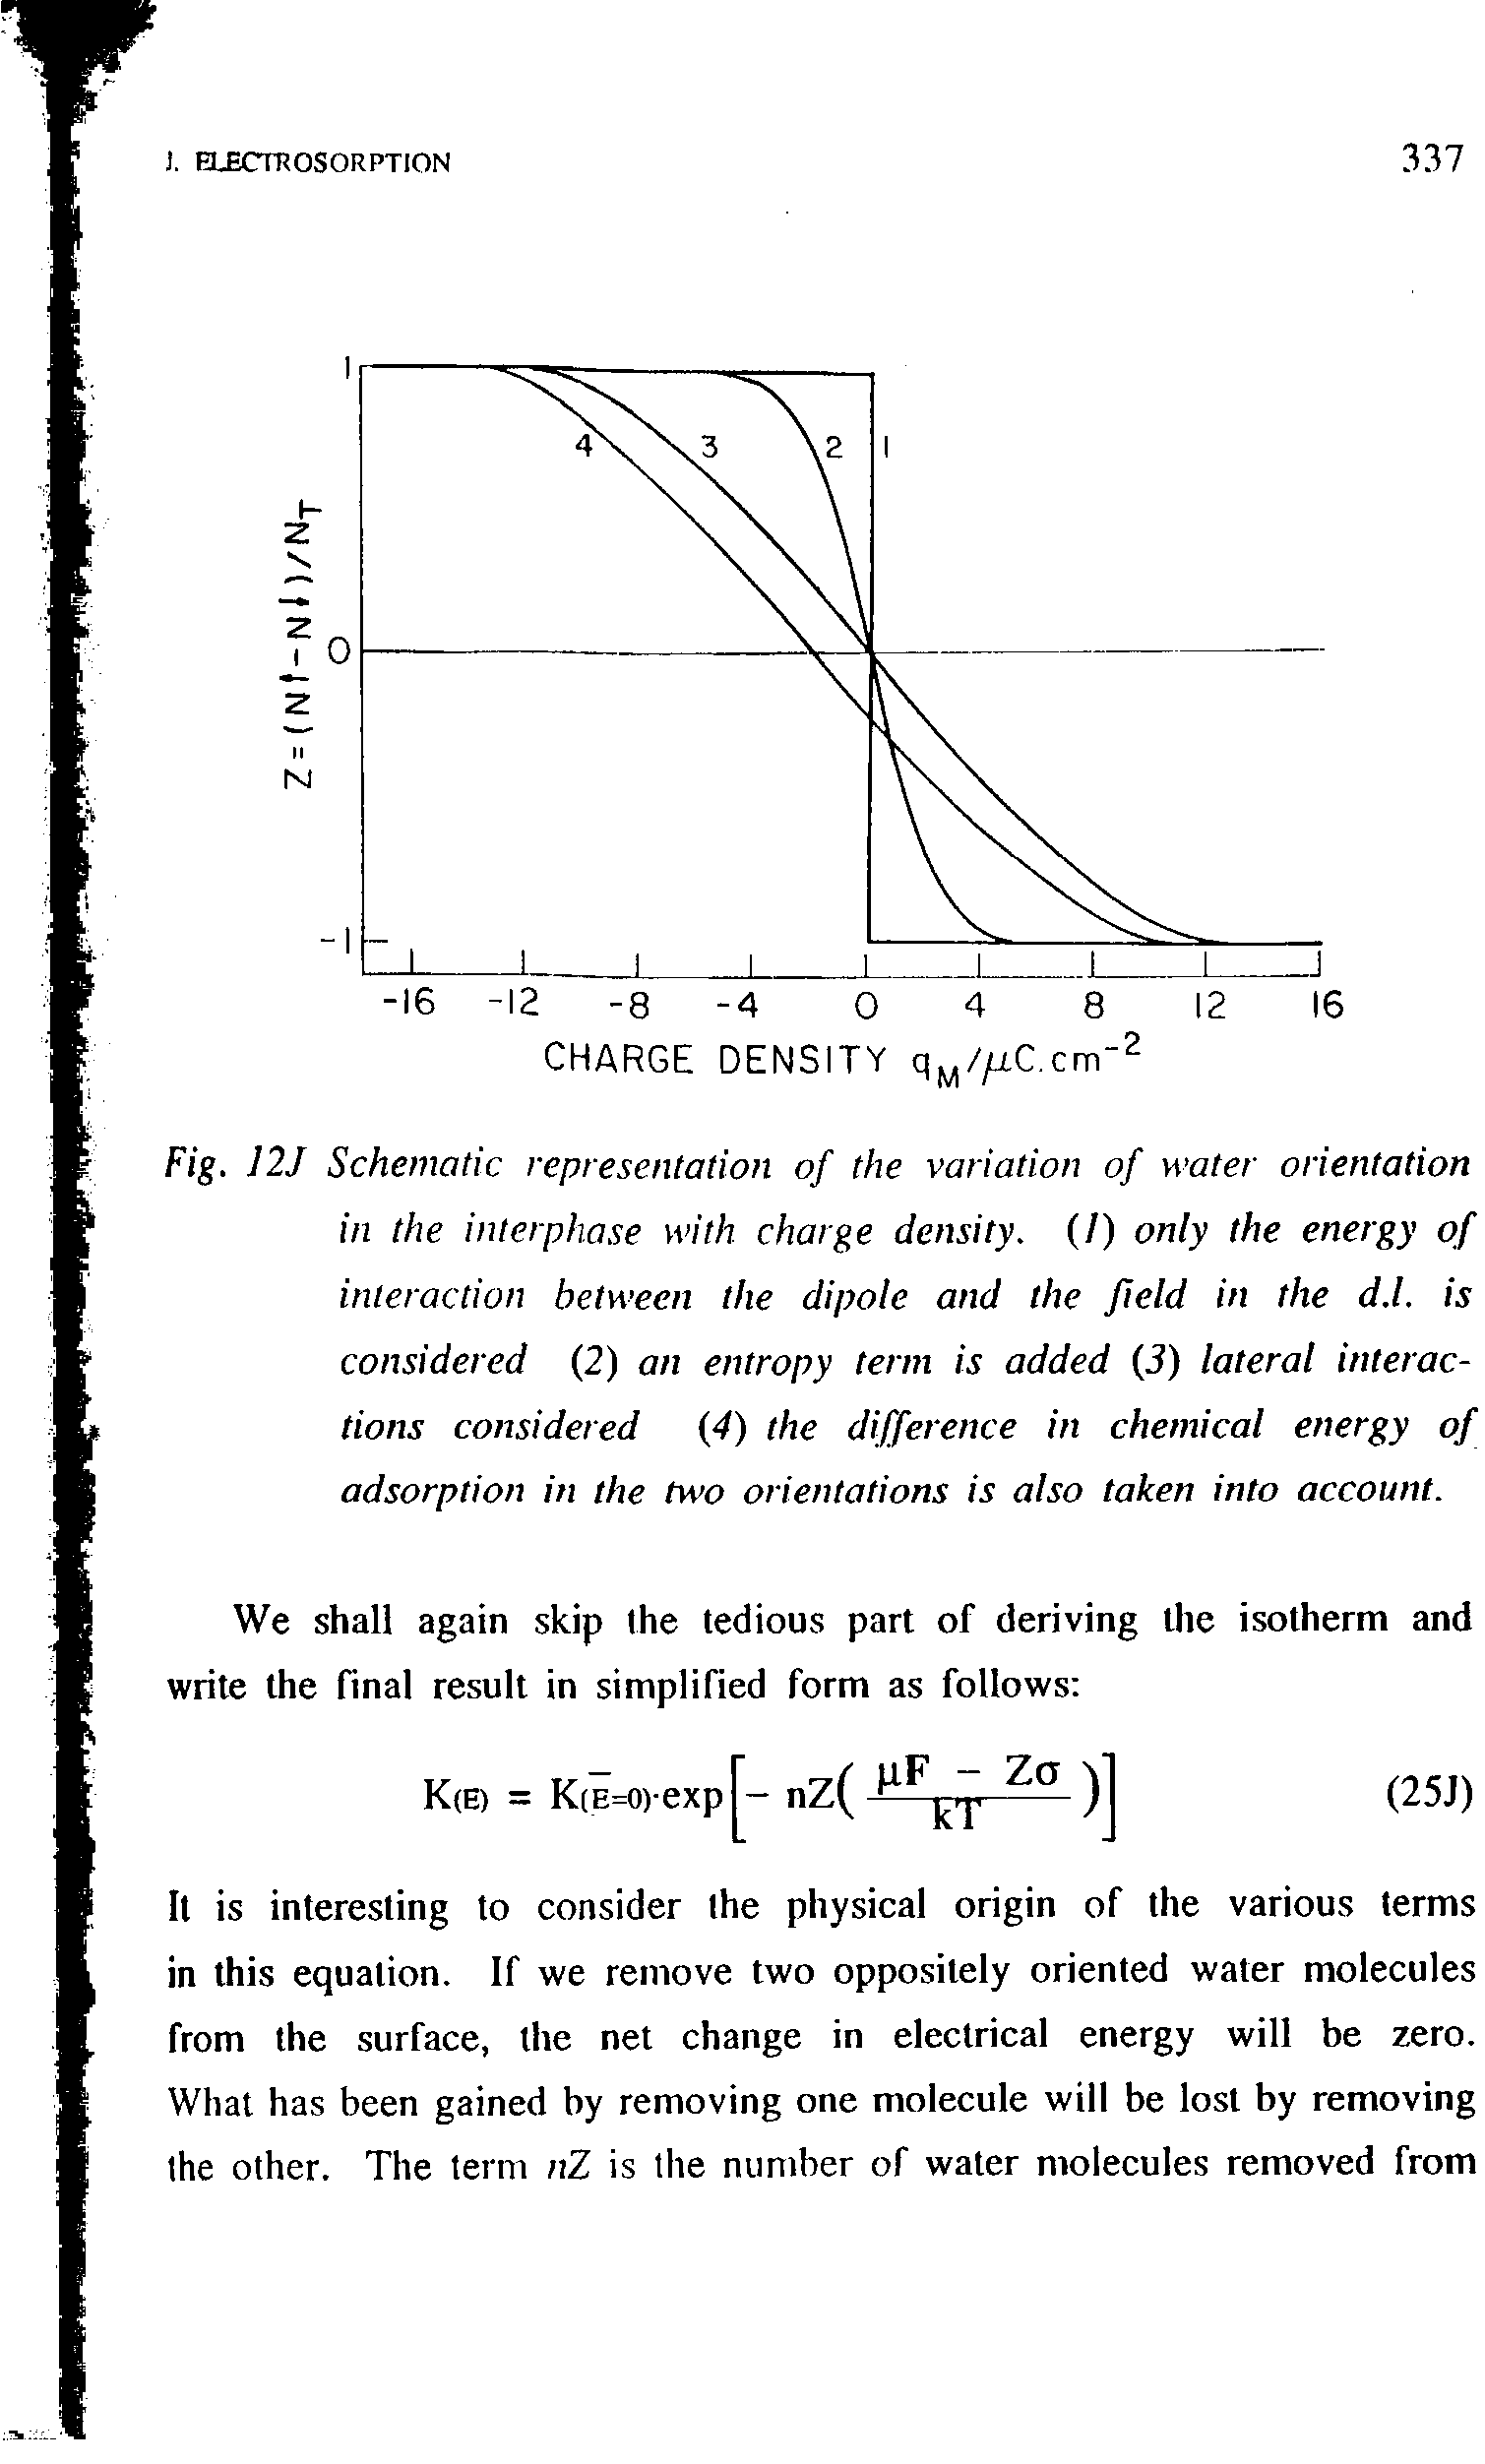 Fig. 12J Schematic representation of the variation of water orientation in the interphase with charge density. (/) only the energy of interaction between the dipole and the field in the d.l. is considered (2) an entropy term is added (3) lateral interactions considered 4) the difference in chemical energy of adsorption in the two orientations is also taken into account.